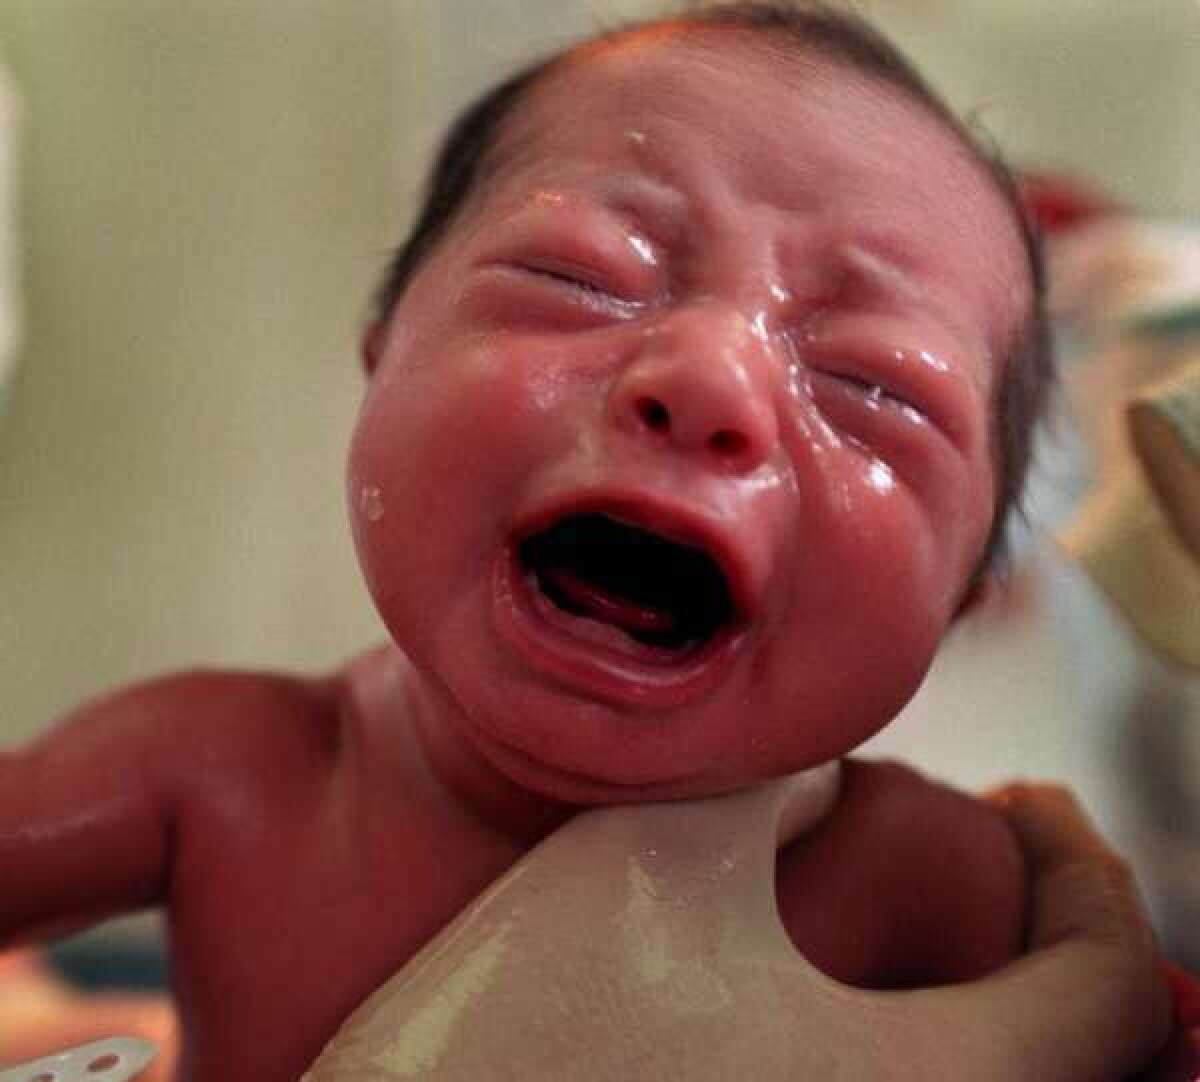 Women's brains more likely than men's to respond to crying babies ...